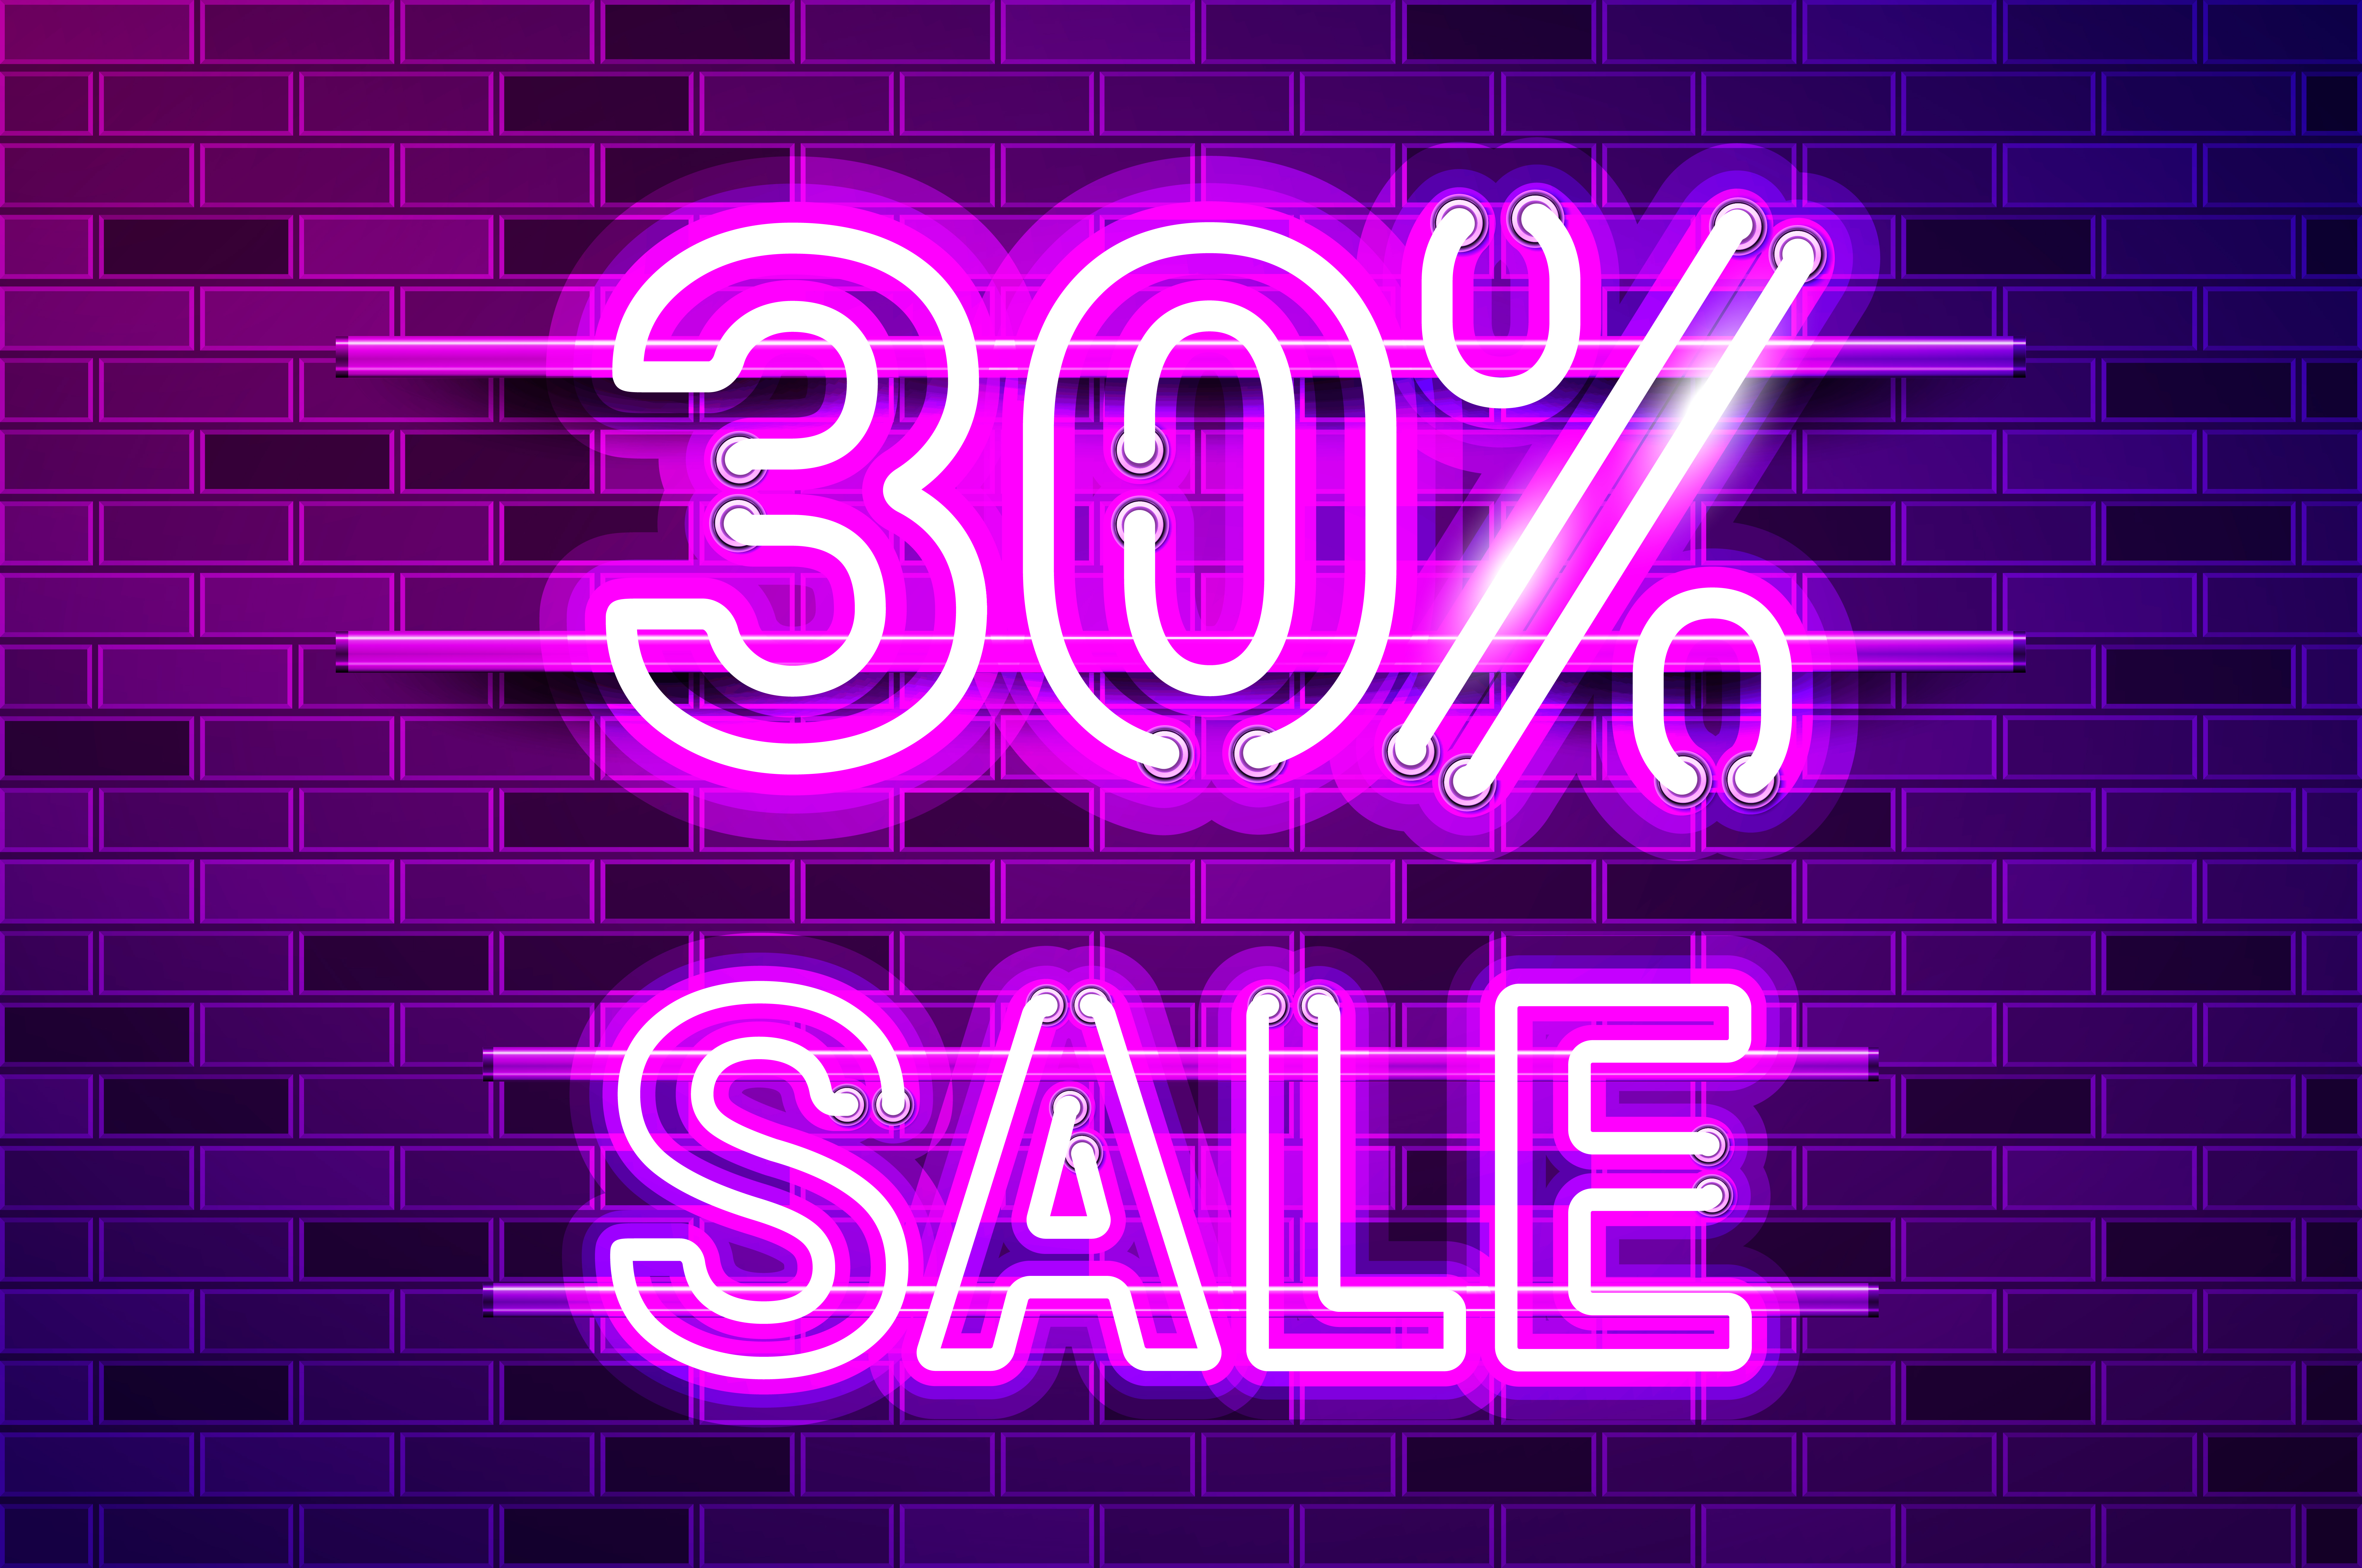 30 percent SALE glowing neon lamp sign. Realistic vector illustration. Purple brick wall, violet glow, metal holders.. 30 percent SALE glowing purple neon lamp sign